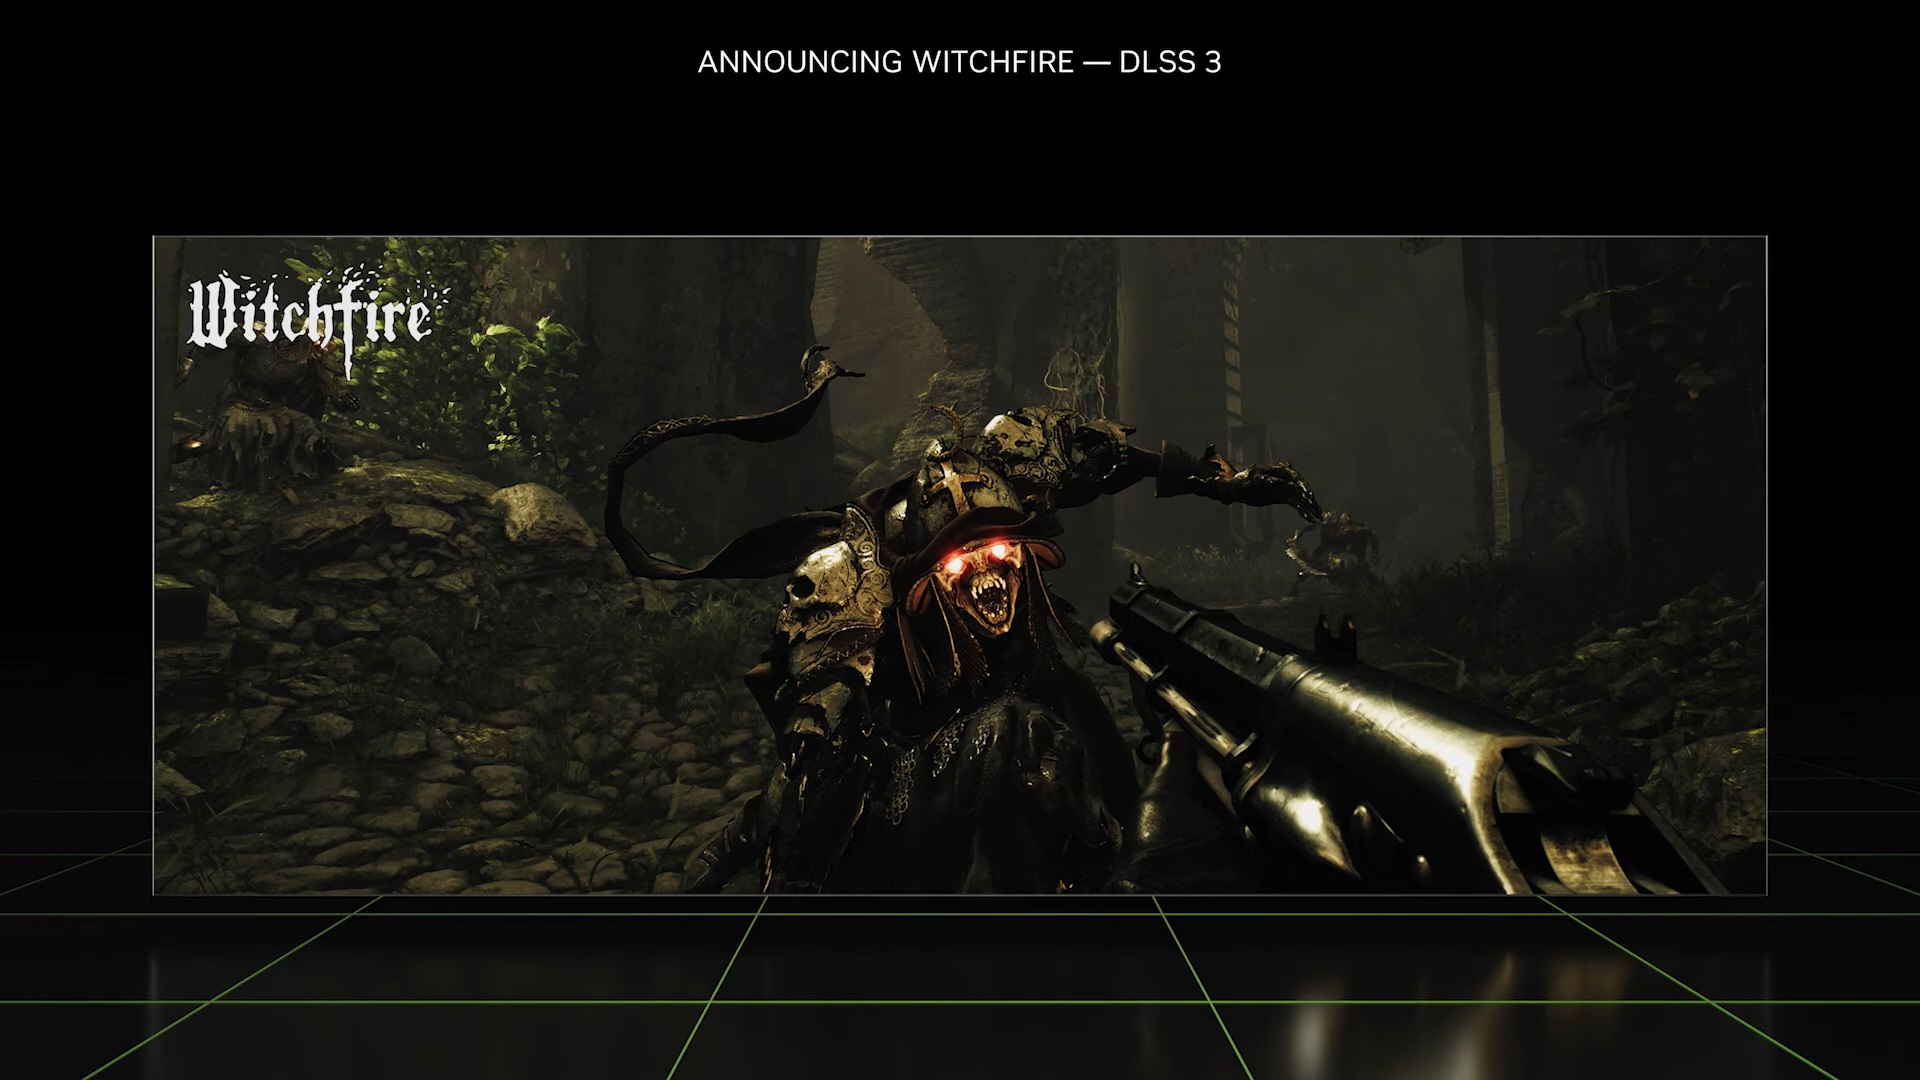 Witchfire shown with Nvidia DLSS 3.